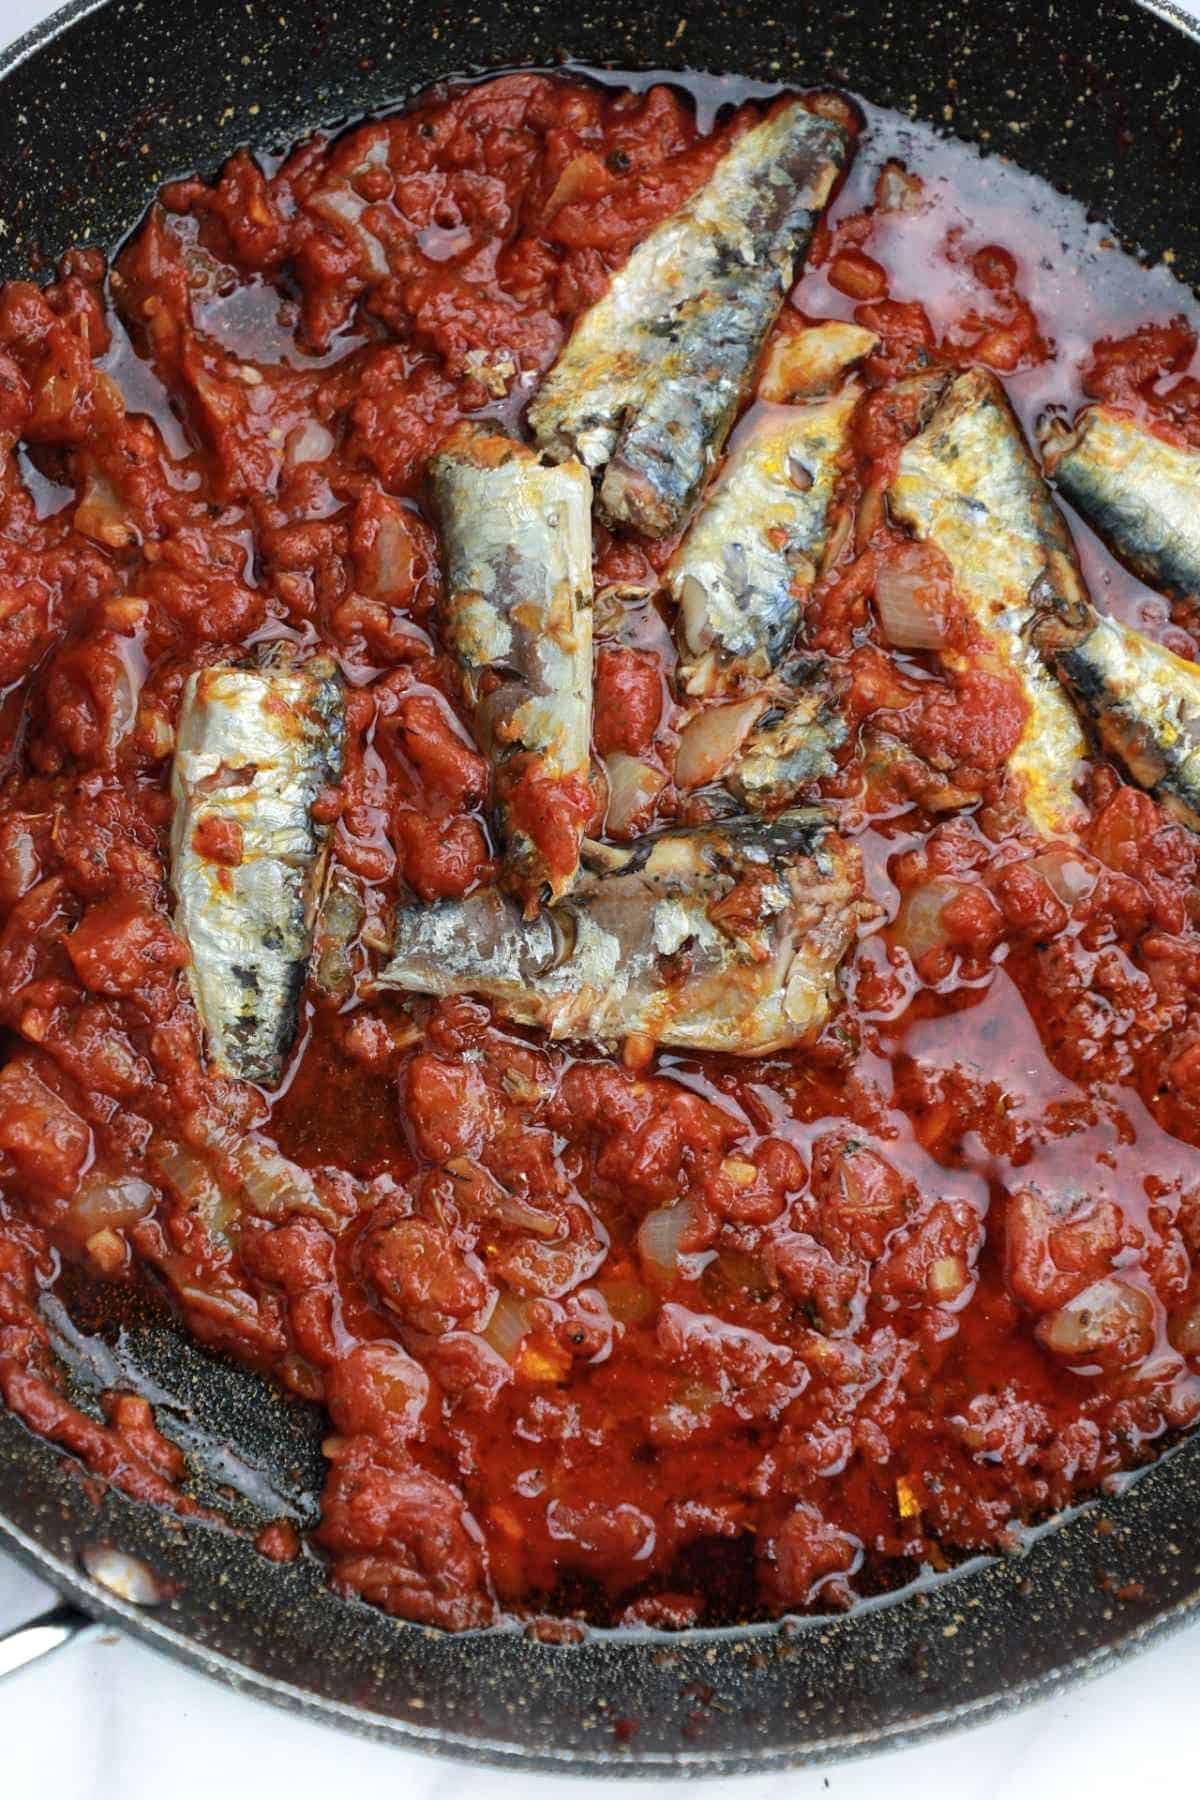 sardines added to the frying pan.